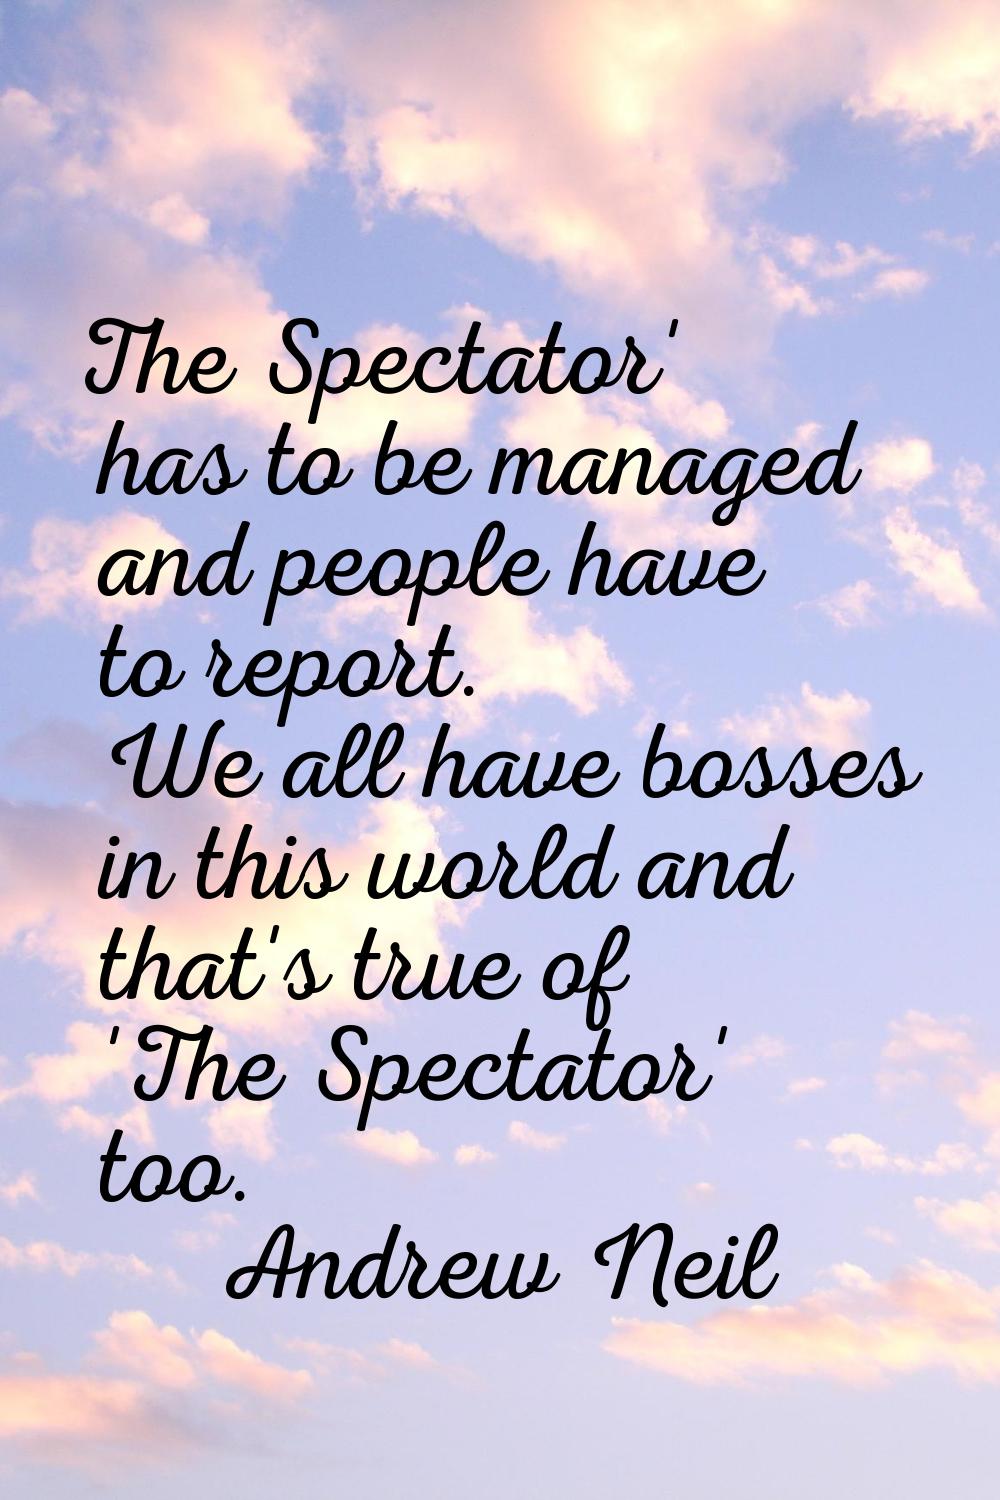 The Spectator' has to be managed and people have to report. We all have bosses in this world and th